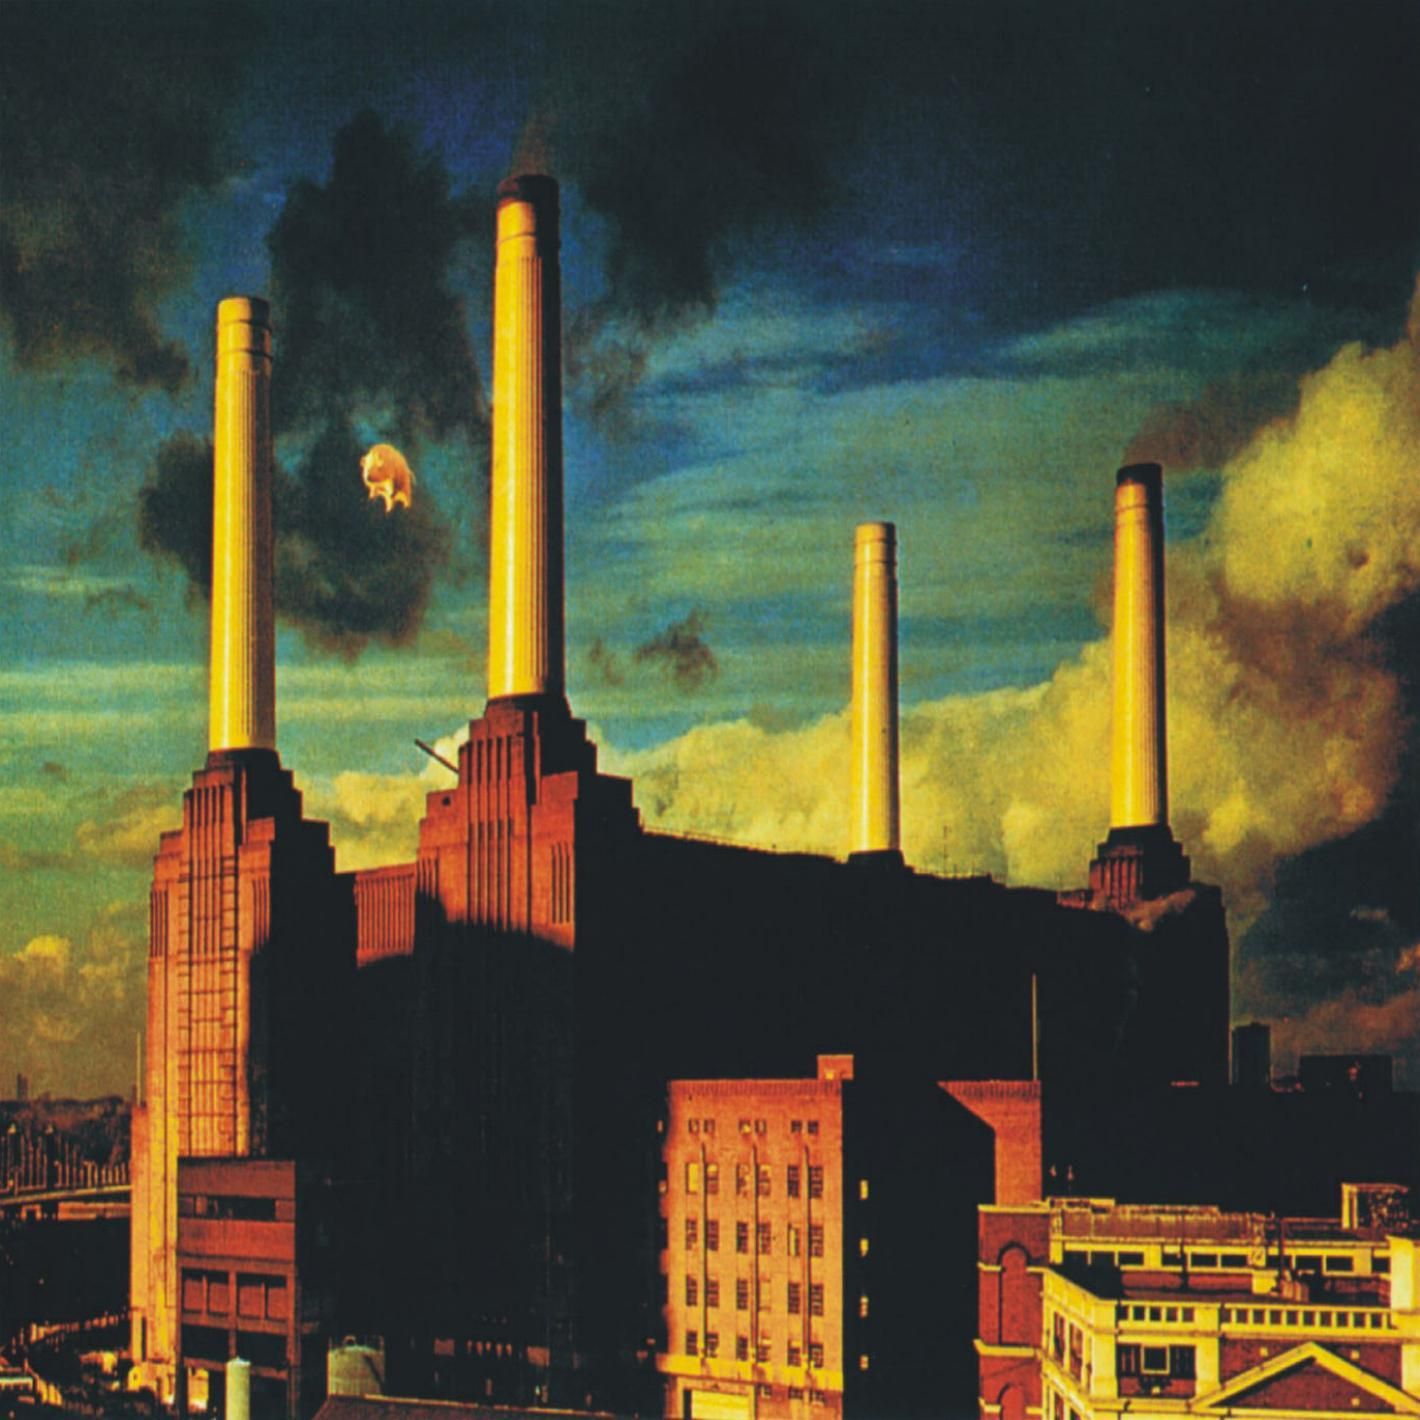 pink floyd albums and songs